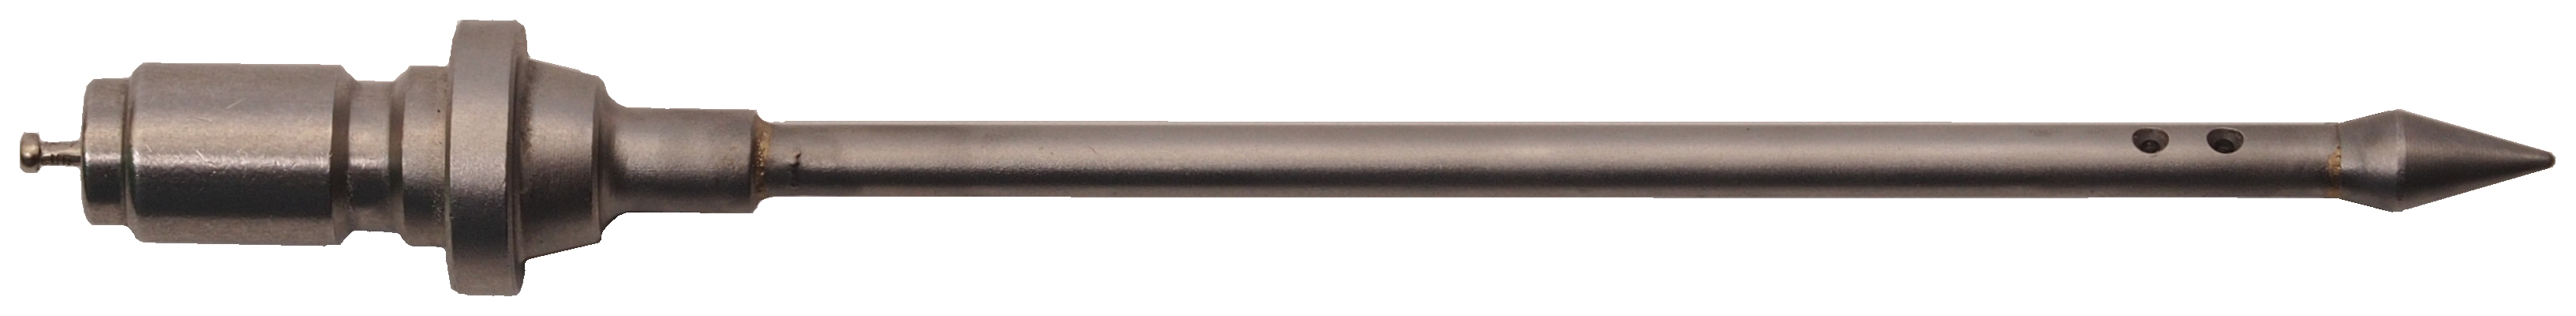 ArborSystems Pointle Palm Injection Tip